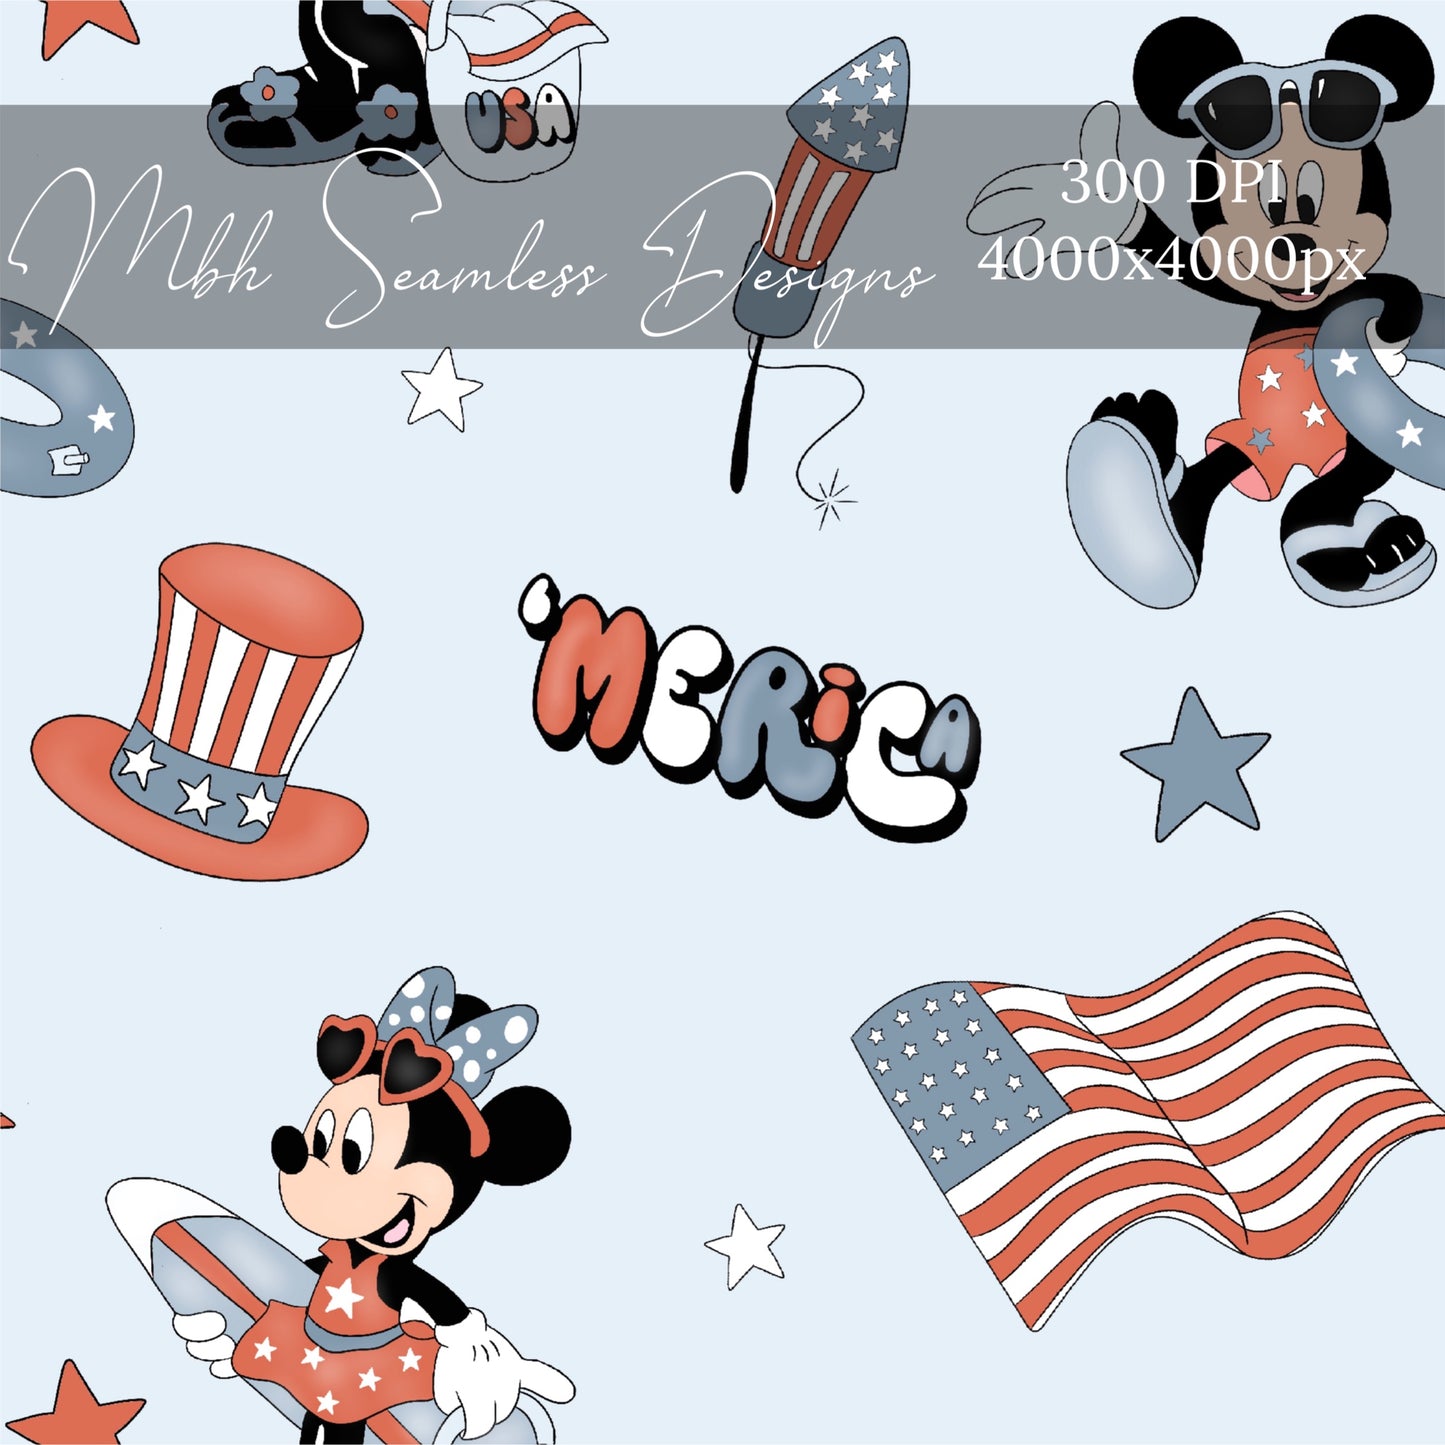 Mouse ‘Merica BLUE Seamless Pattern